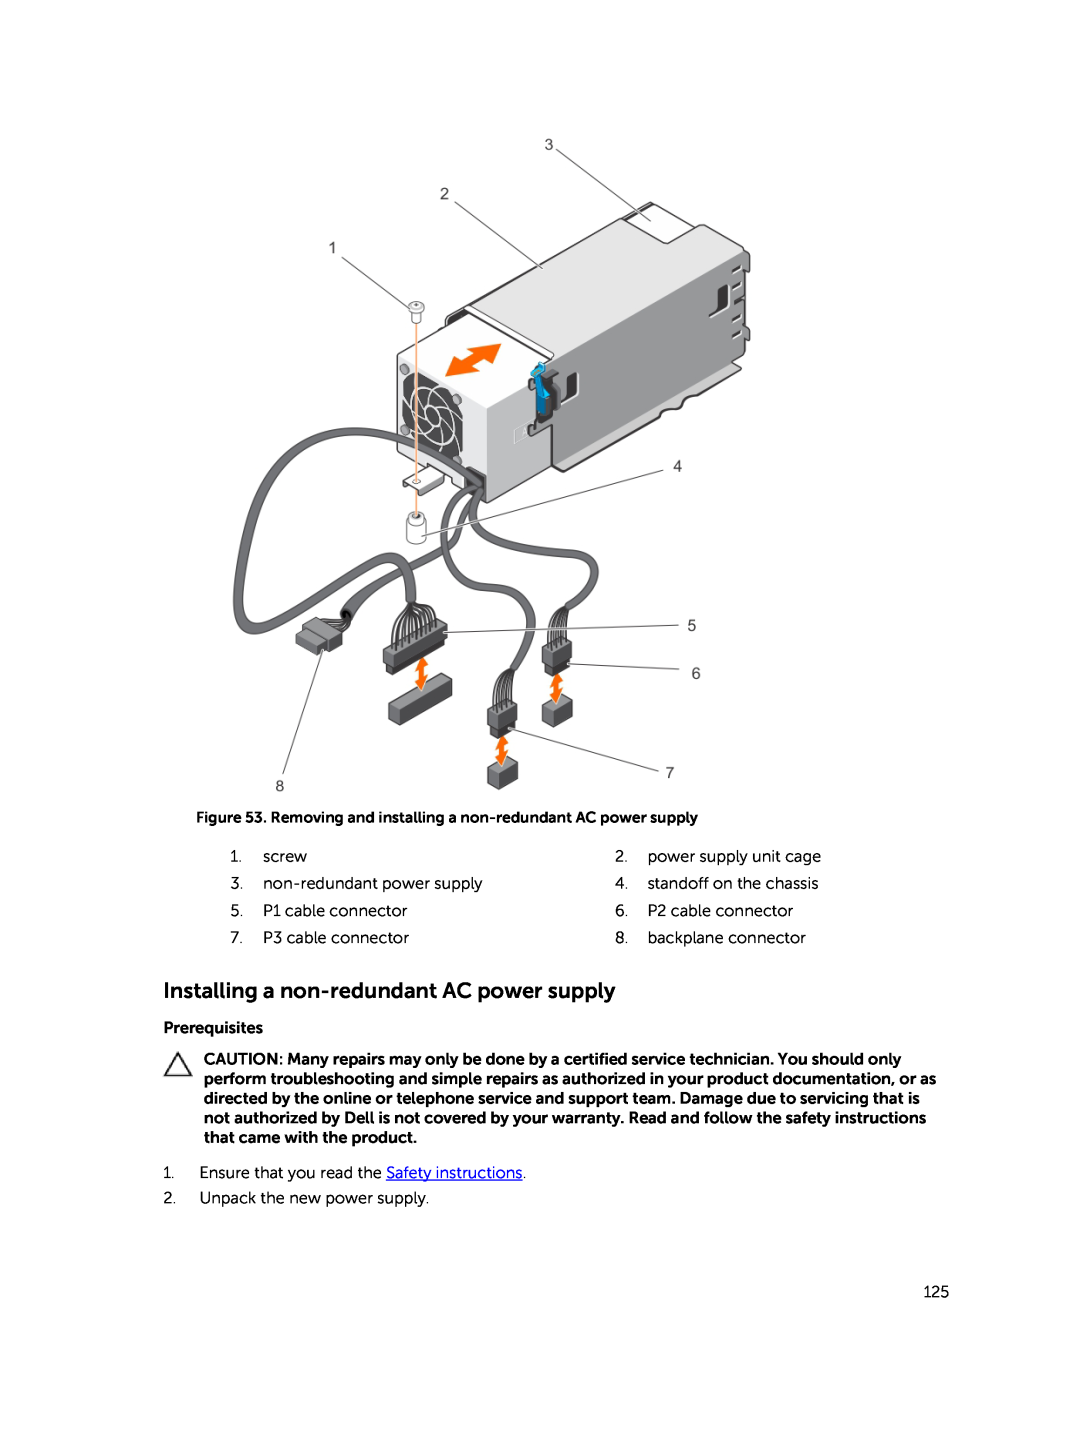 Dell E30S owner manual Installing a non-redundant AC power supply, Removing and installing a non-redundant AC power supply 